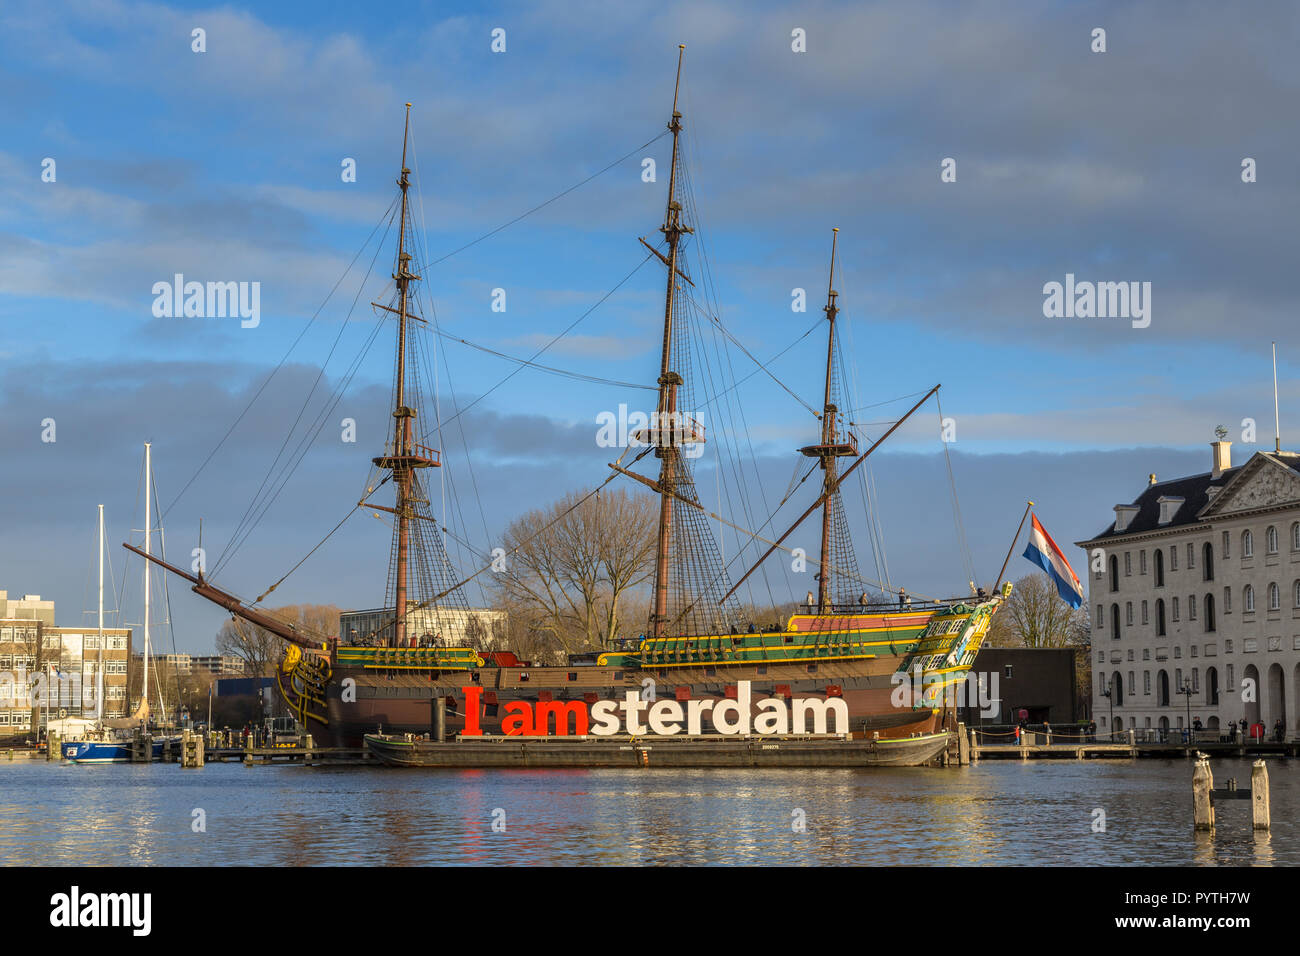 AMSTERDAM, NETHERLANDS - DECEMBER 29, 2016: The Amsterdam was an 18th-century cargo ship of the Dutch East India Company anchored in front of the Sche Stock Photo